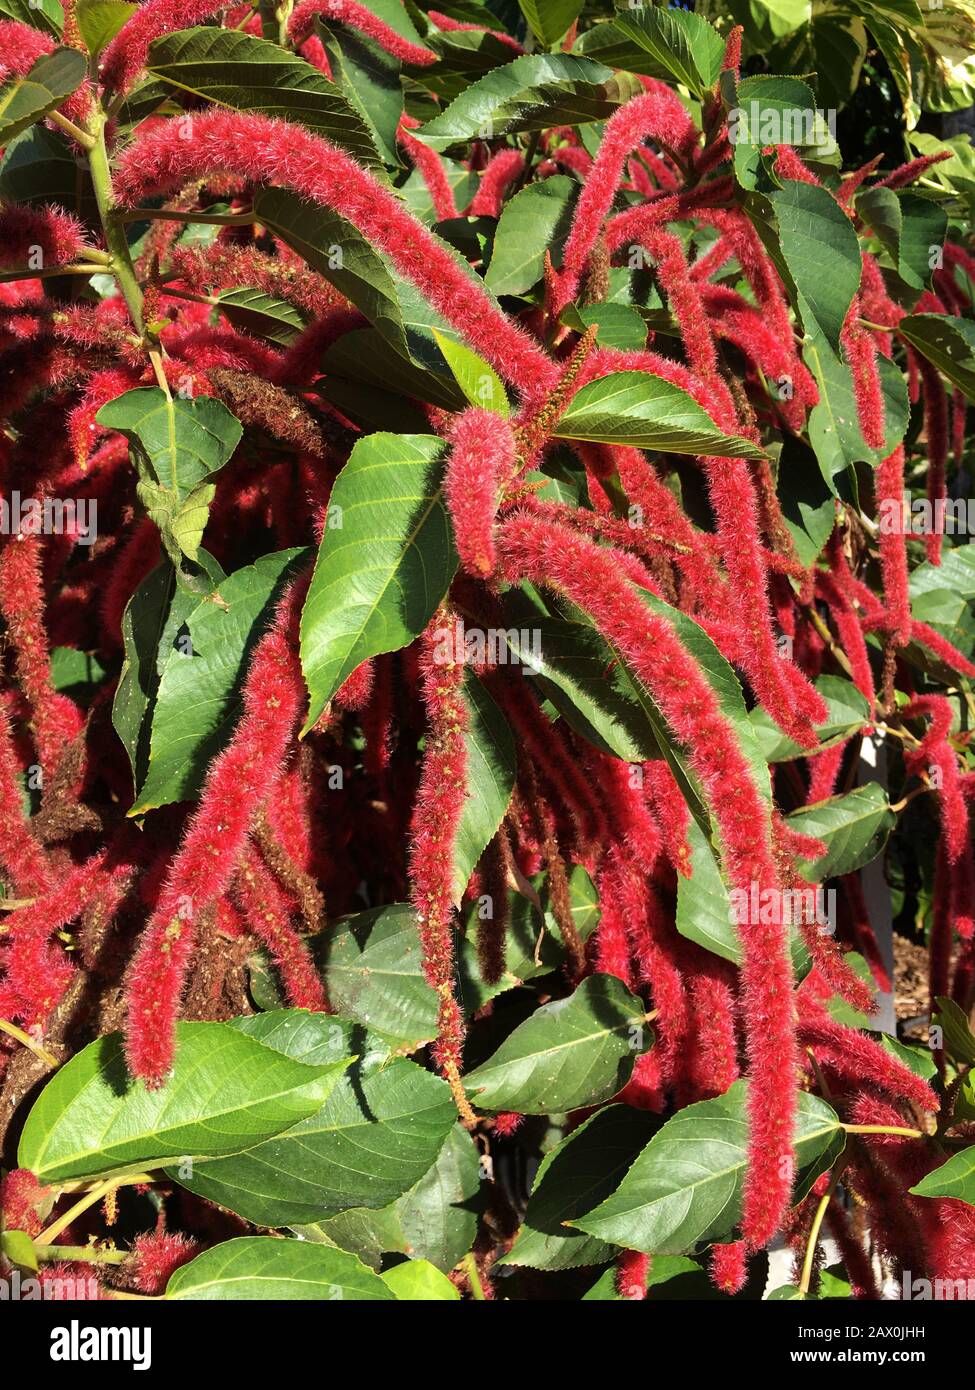 Acalypha plant. Acalypha is a genus of flowering plants in the family Euphorbiaceae. It is one of the largest euphorbiaceae Stock Photo